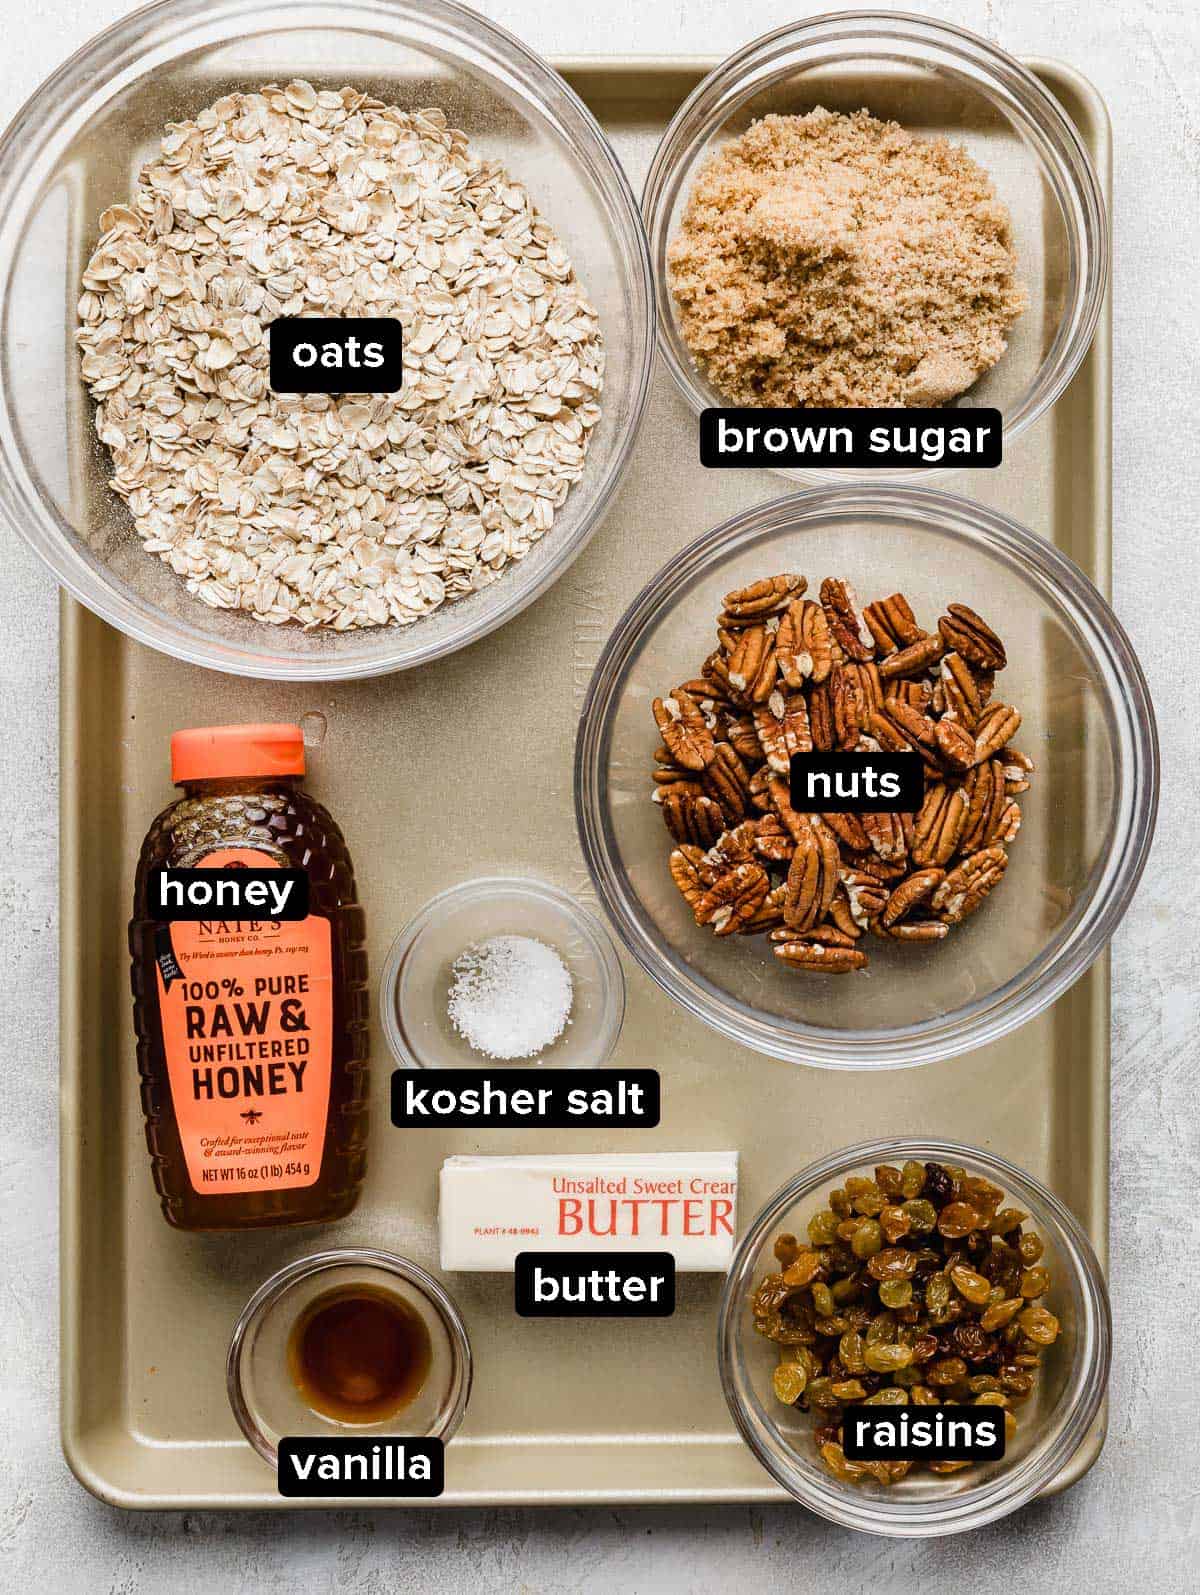 Homemade granola bar ingredients in glass bowls on a bronze colored baking sheet.